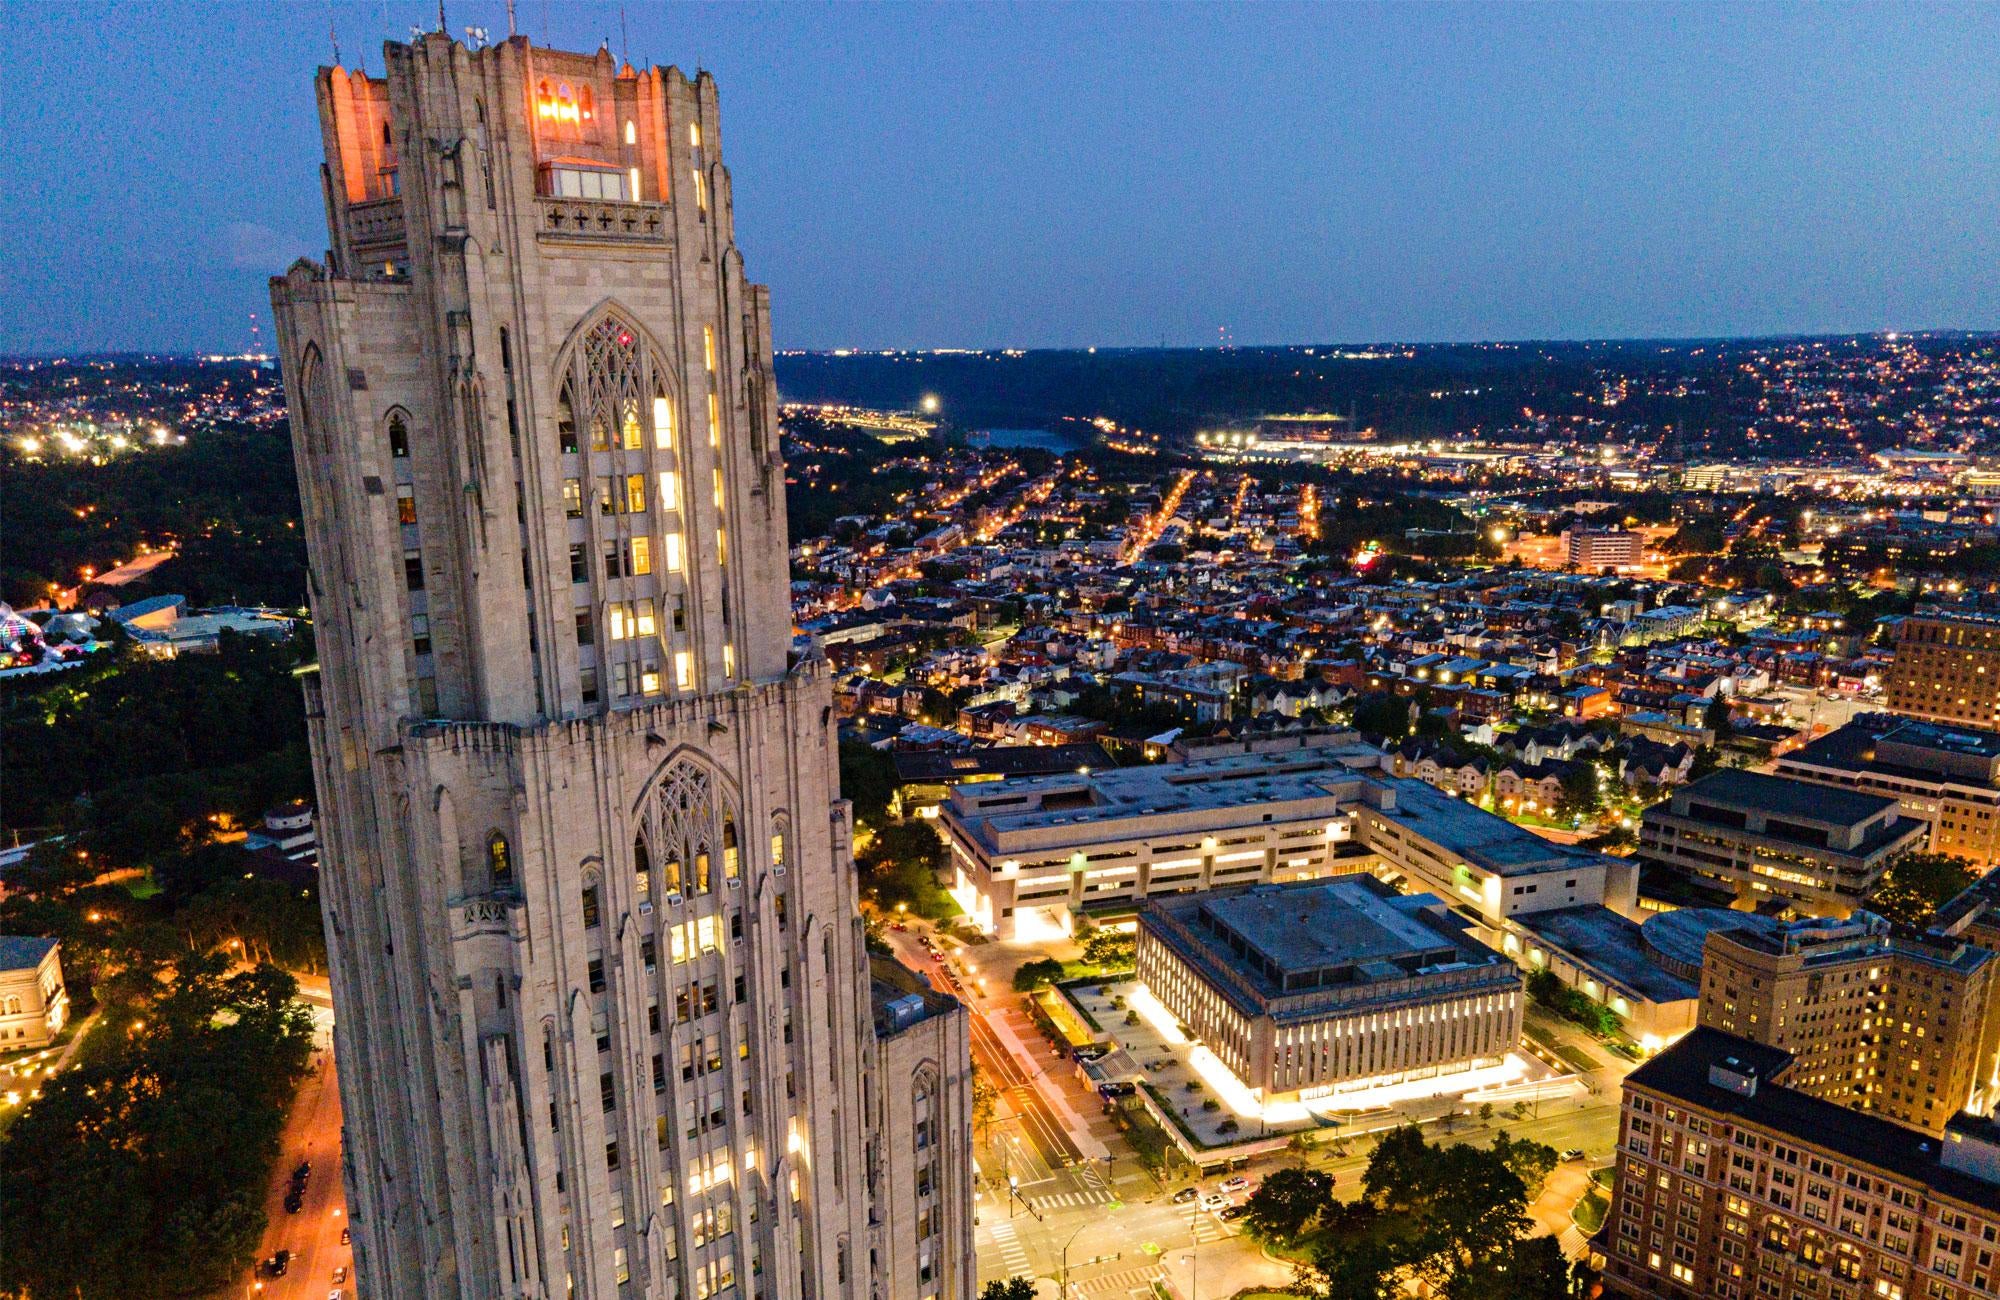 Top of the Cathedral of Learning at night